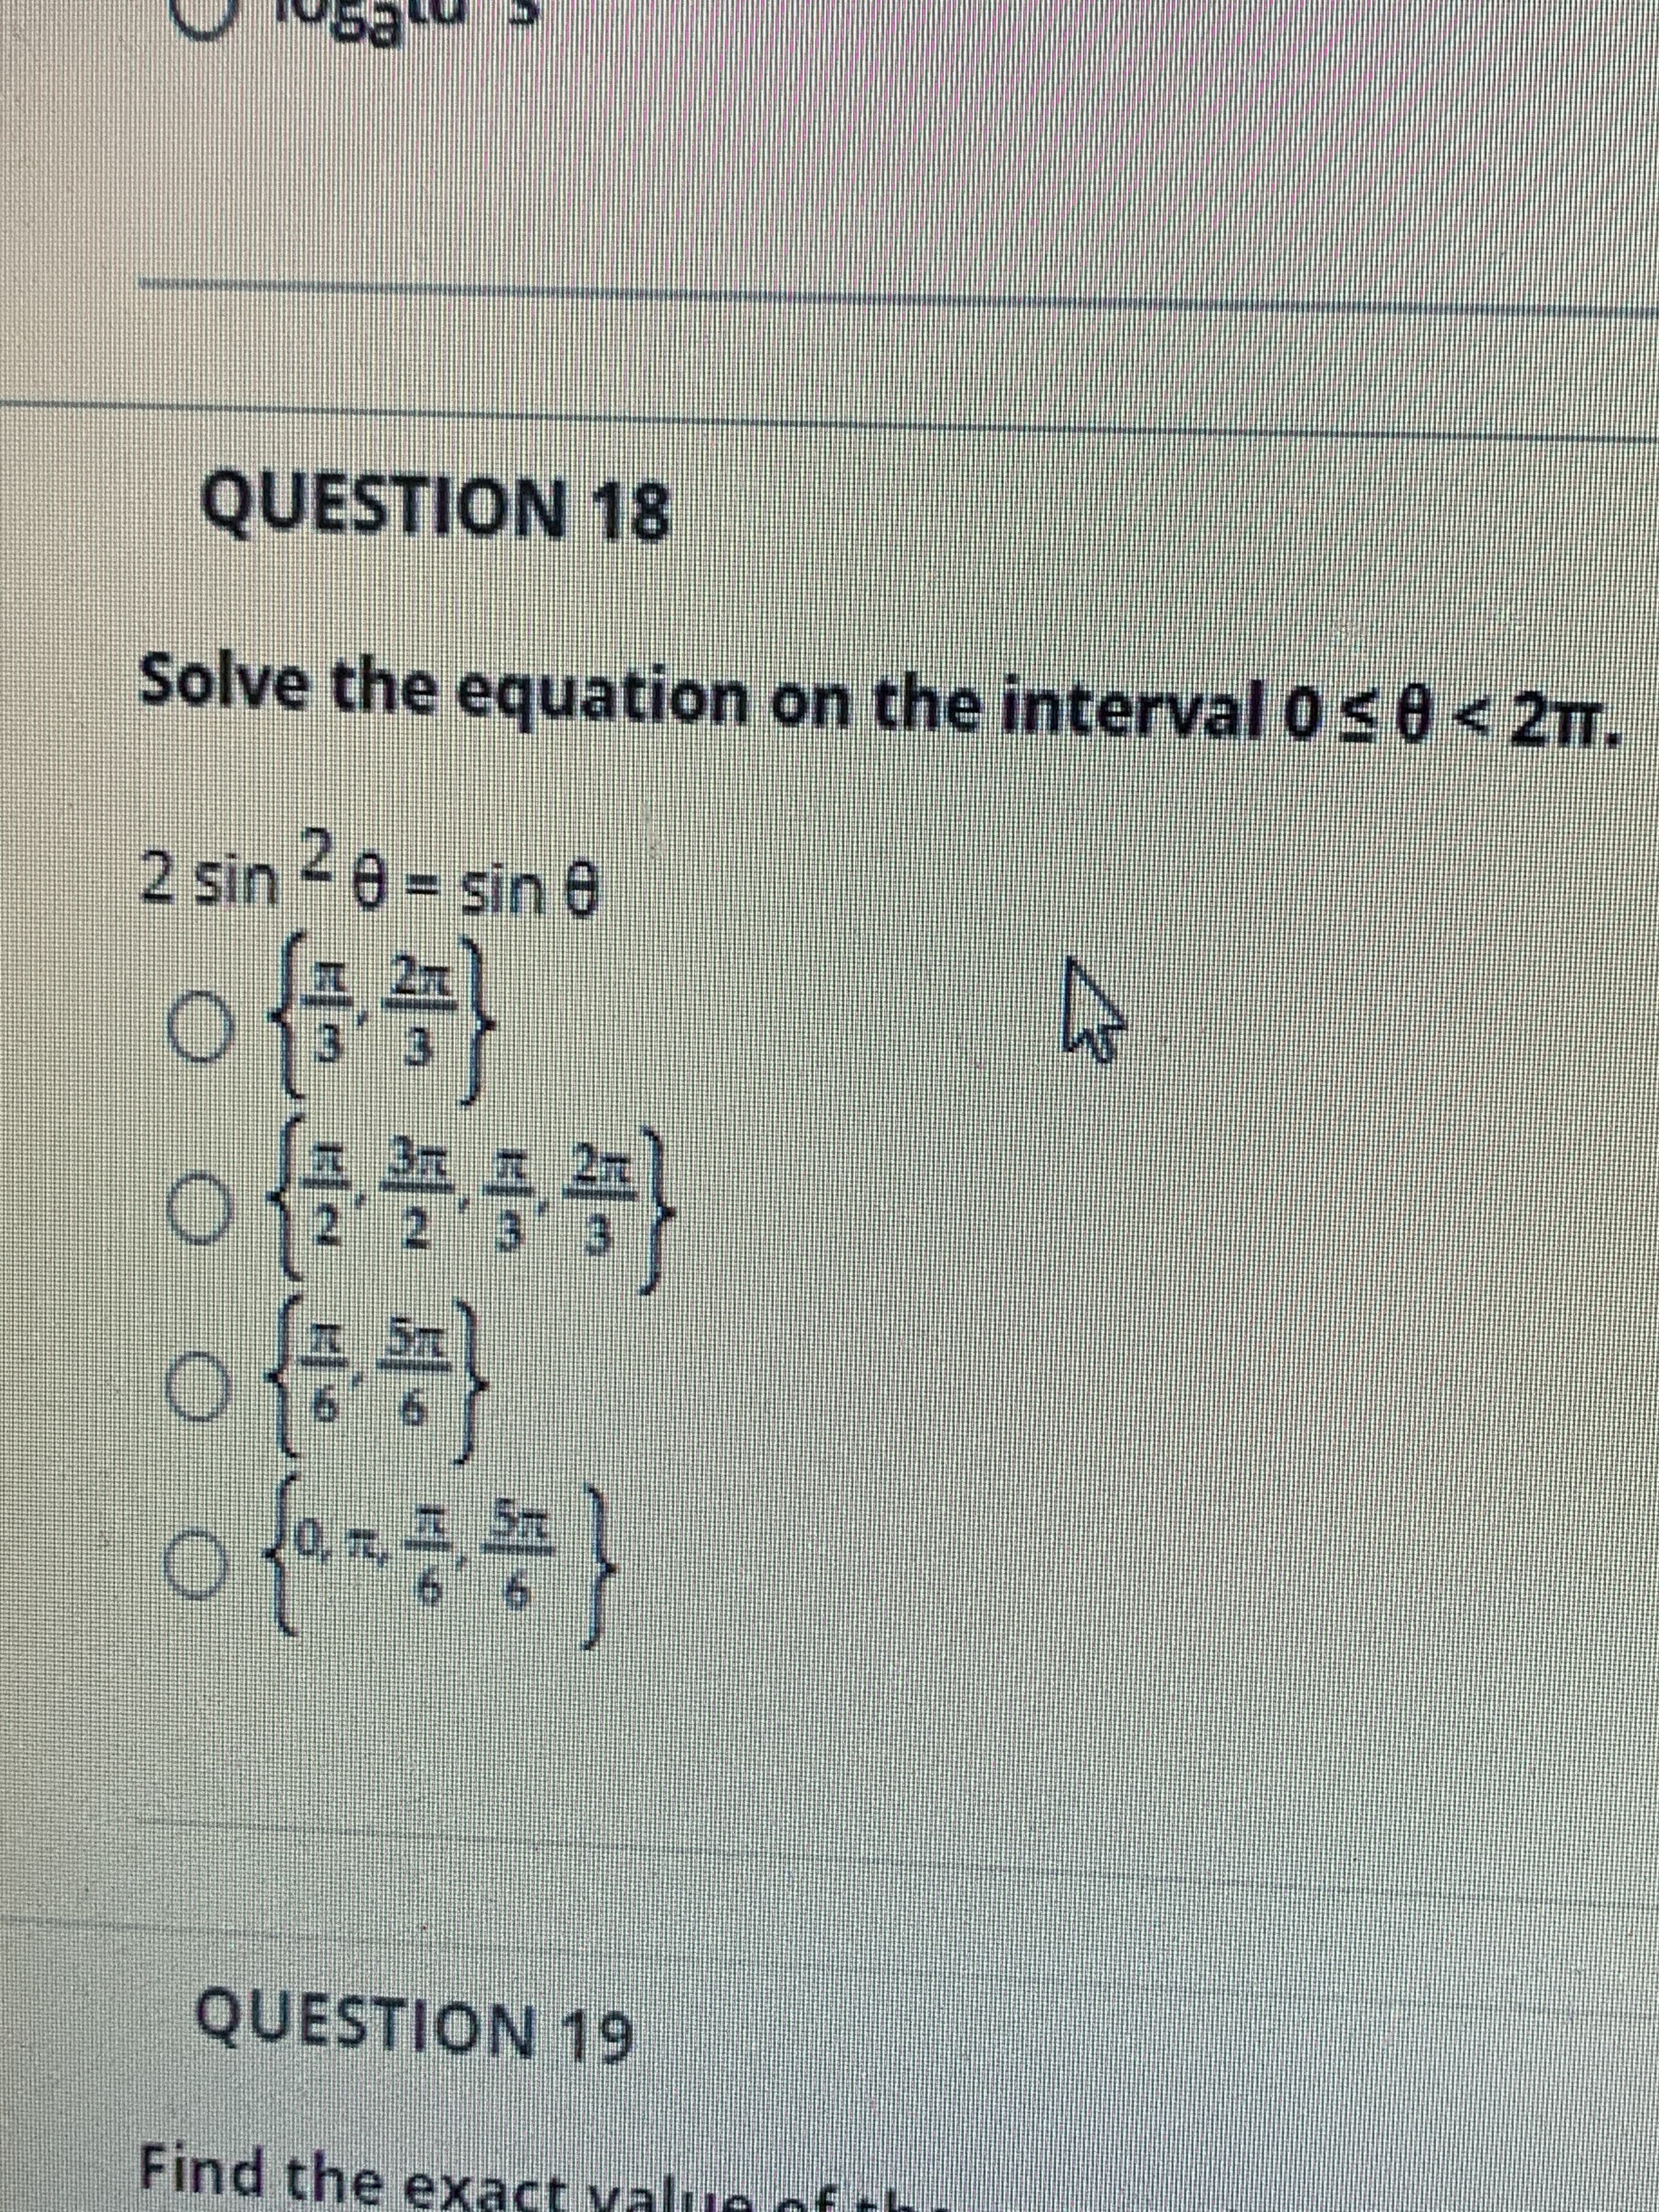 Solve the equation on the interval 050< 2T.
2 sin 0= sin6
